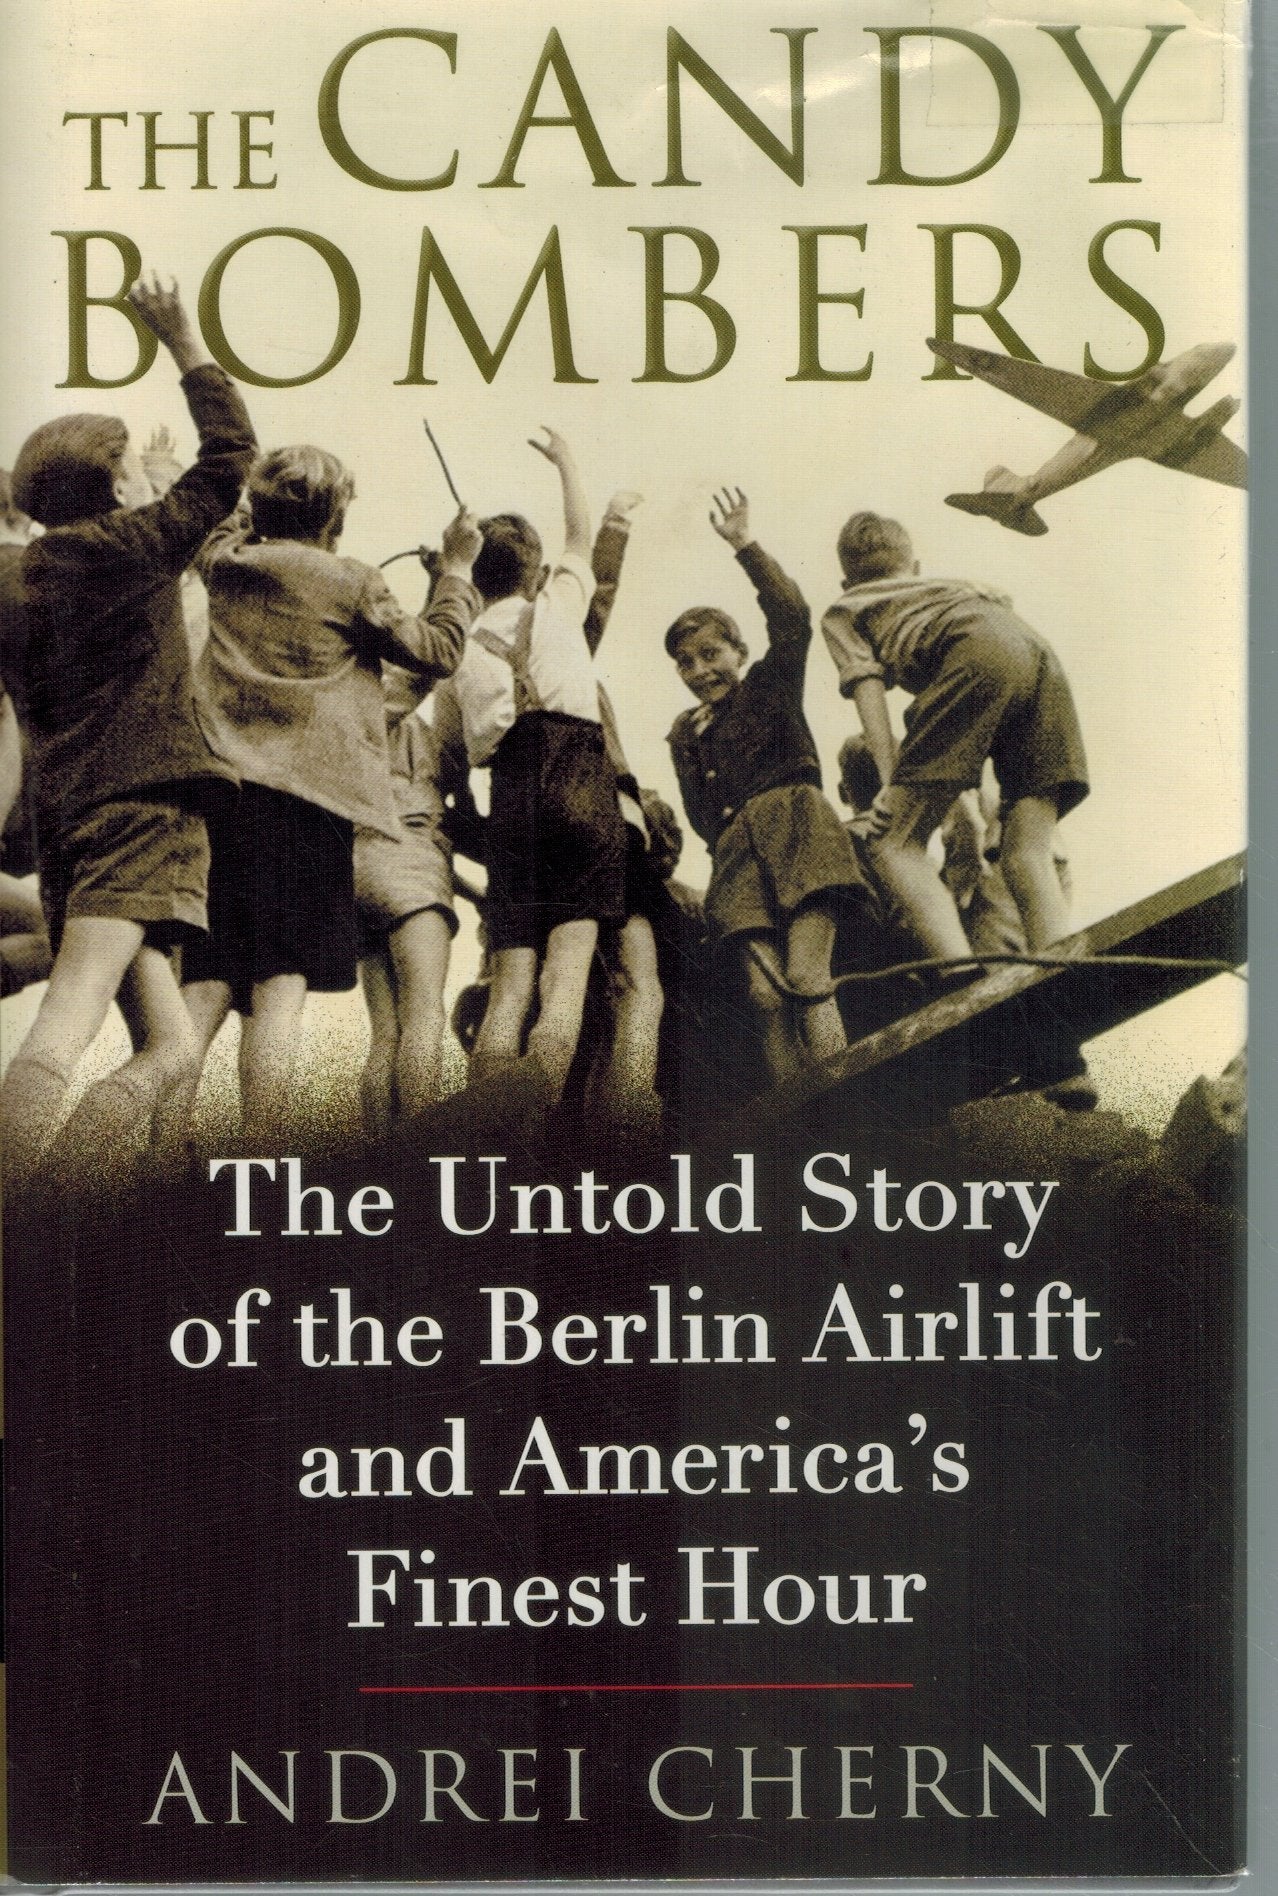 The Candy Bombers  The Untold Story of the Berlin Airlift and America's  Finest Hour